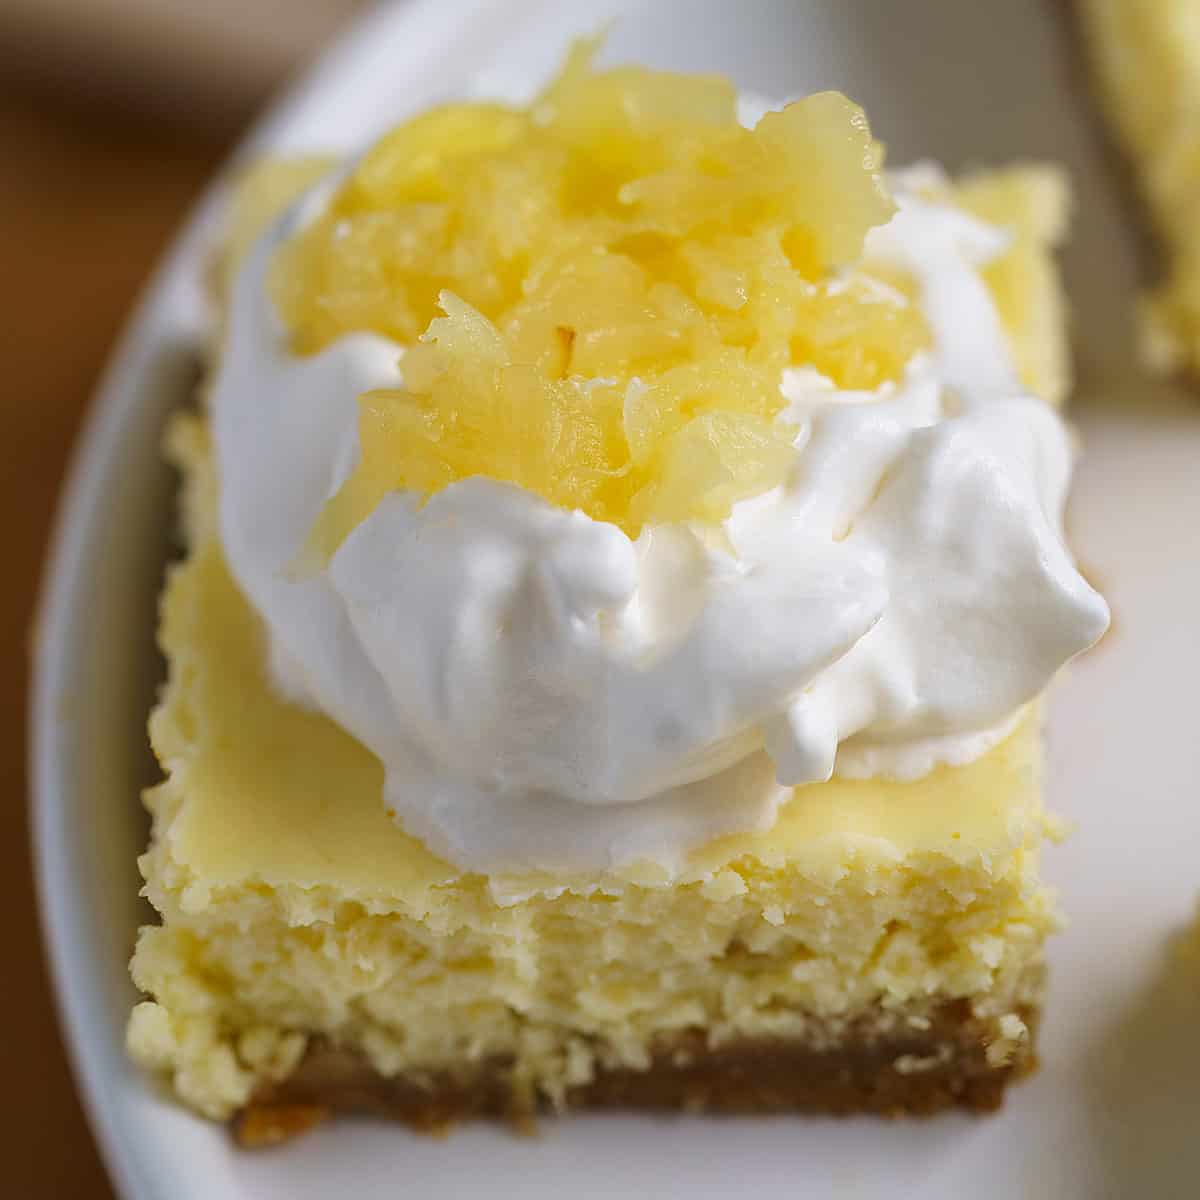 Top view of the pineapple cheesecake bite with whip cream and pineapple on top.